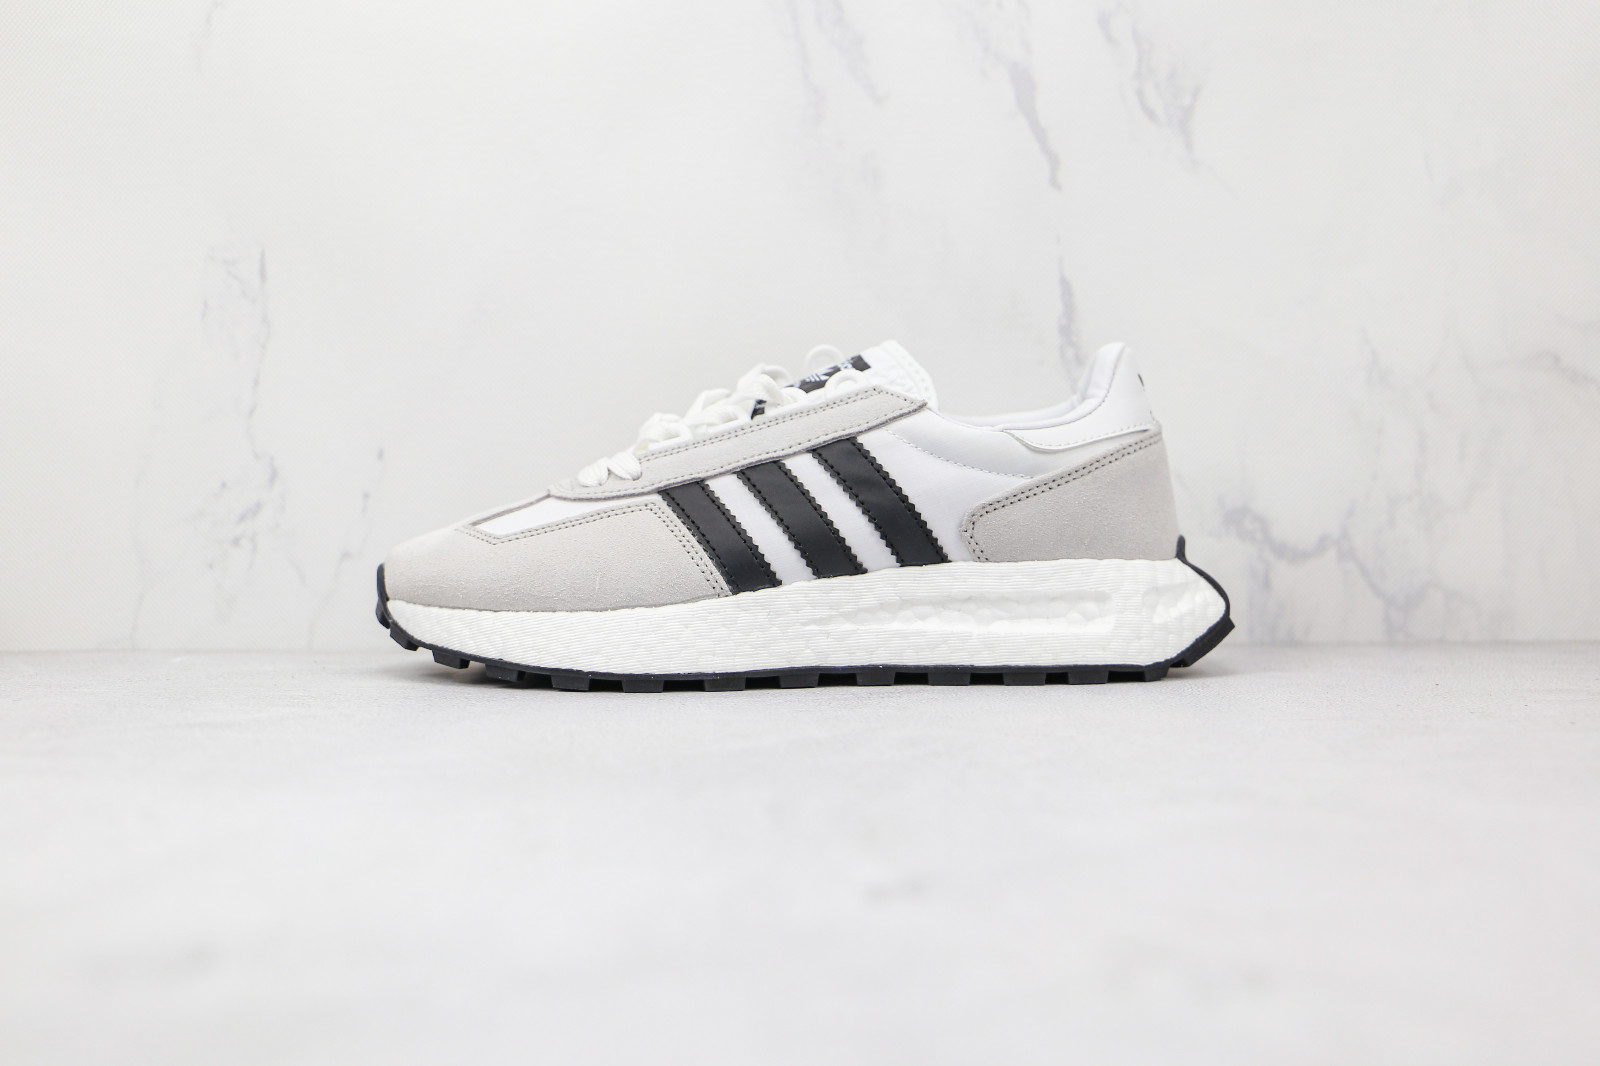 Adidas The Total Shoes - Core Black / Cloud White / Gray Six